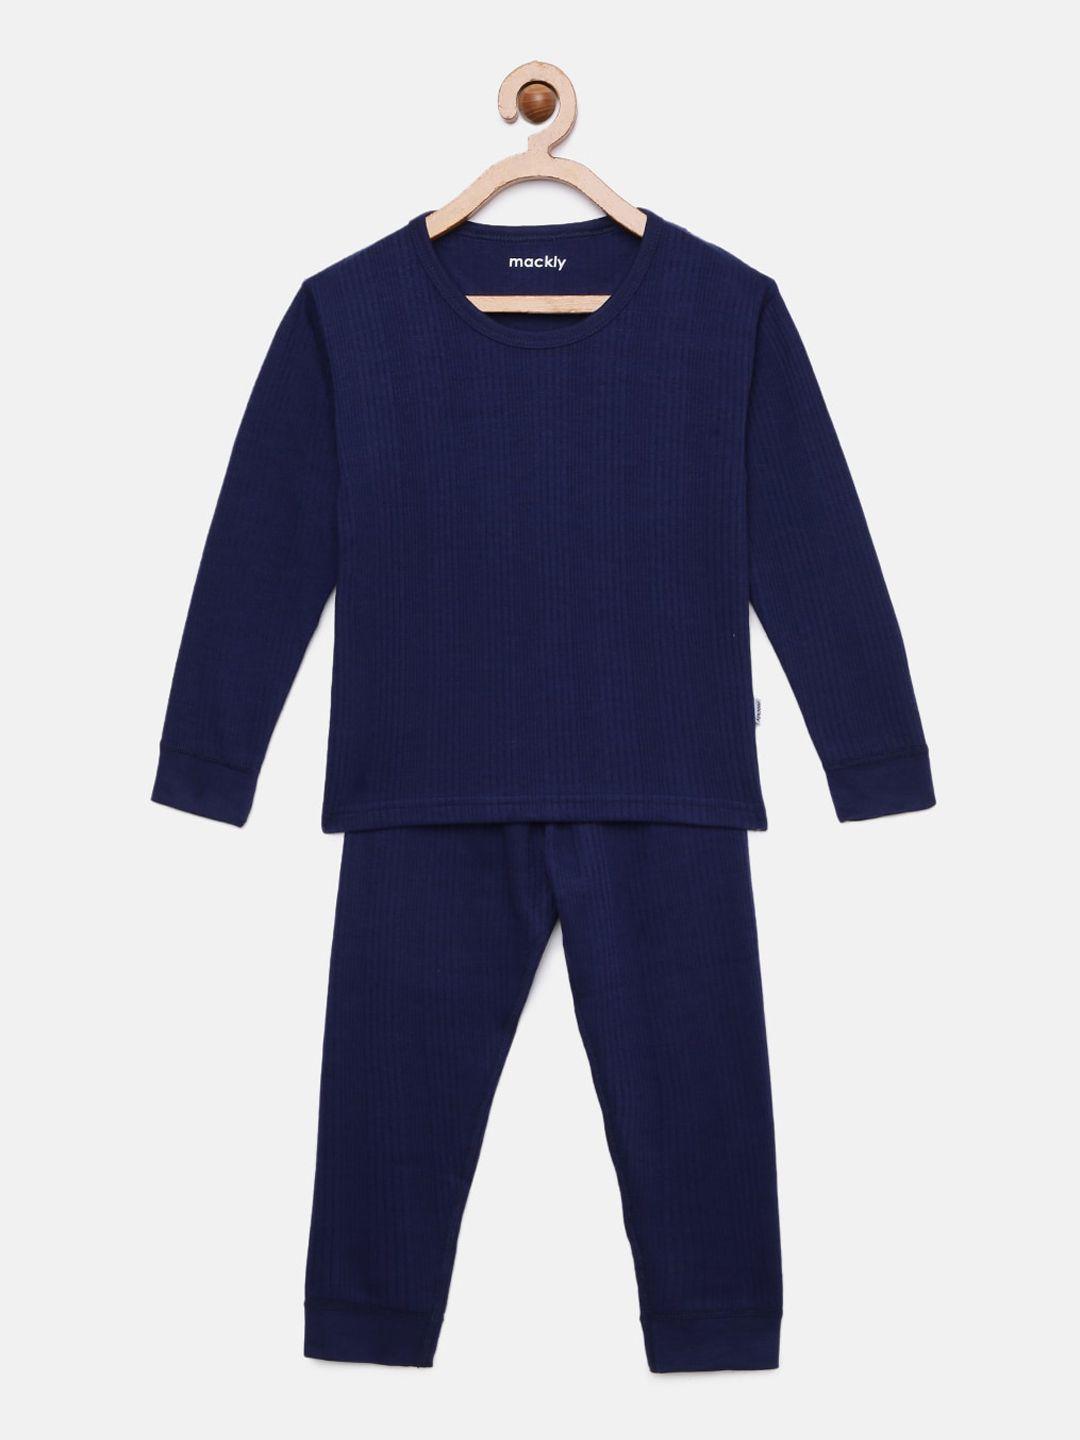 mackly kids navy blue striped ribbed thermal set